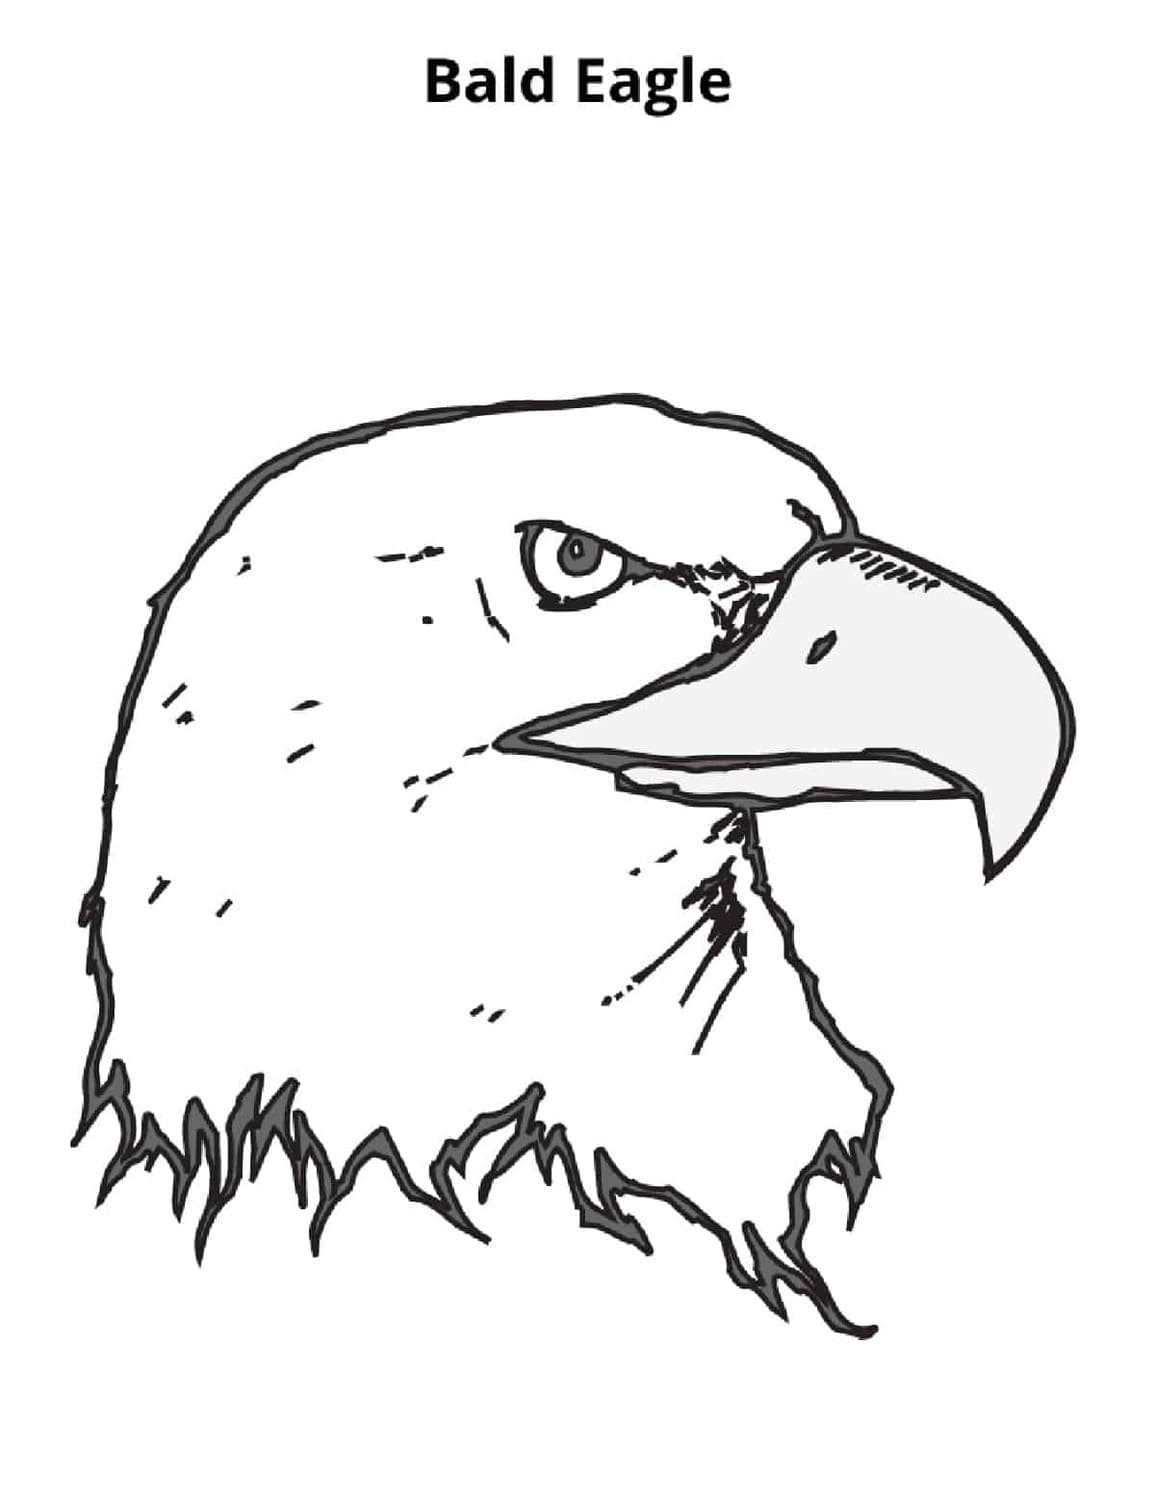 Bald eagle coloring pages printable for free download